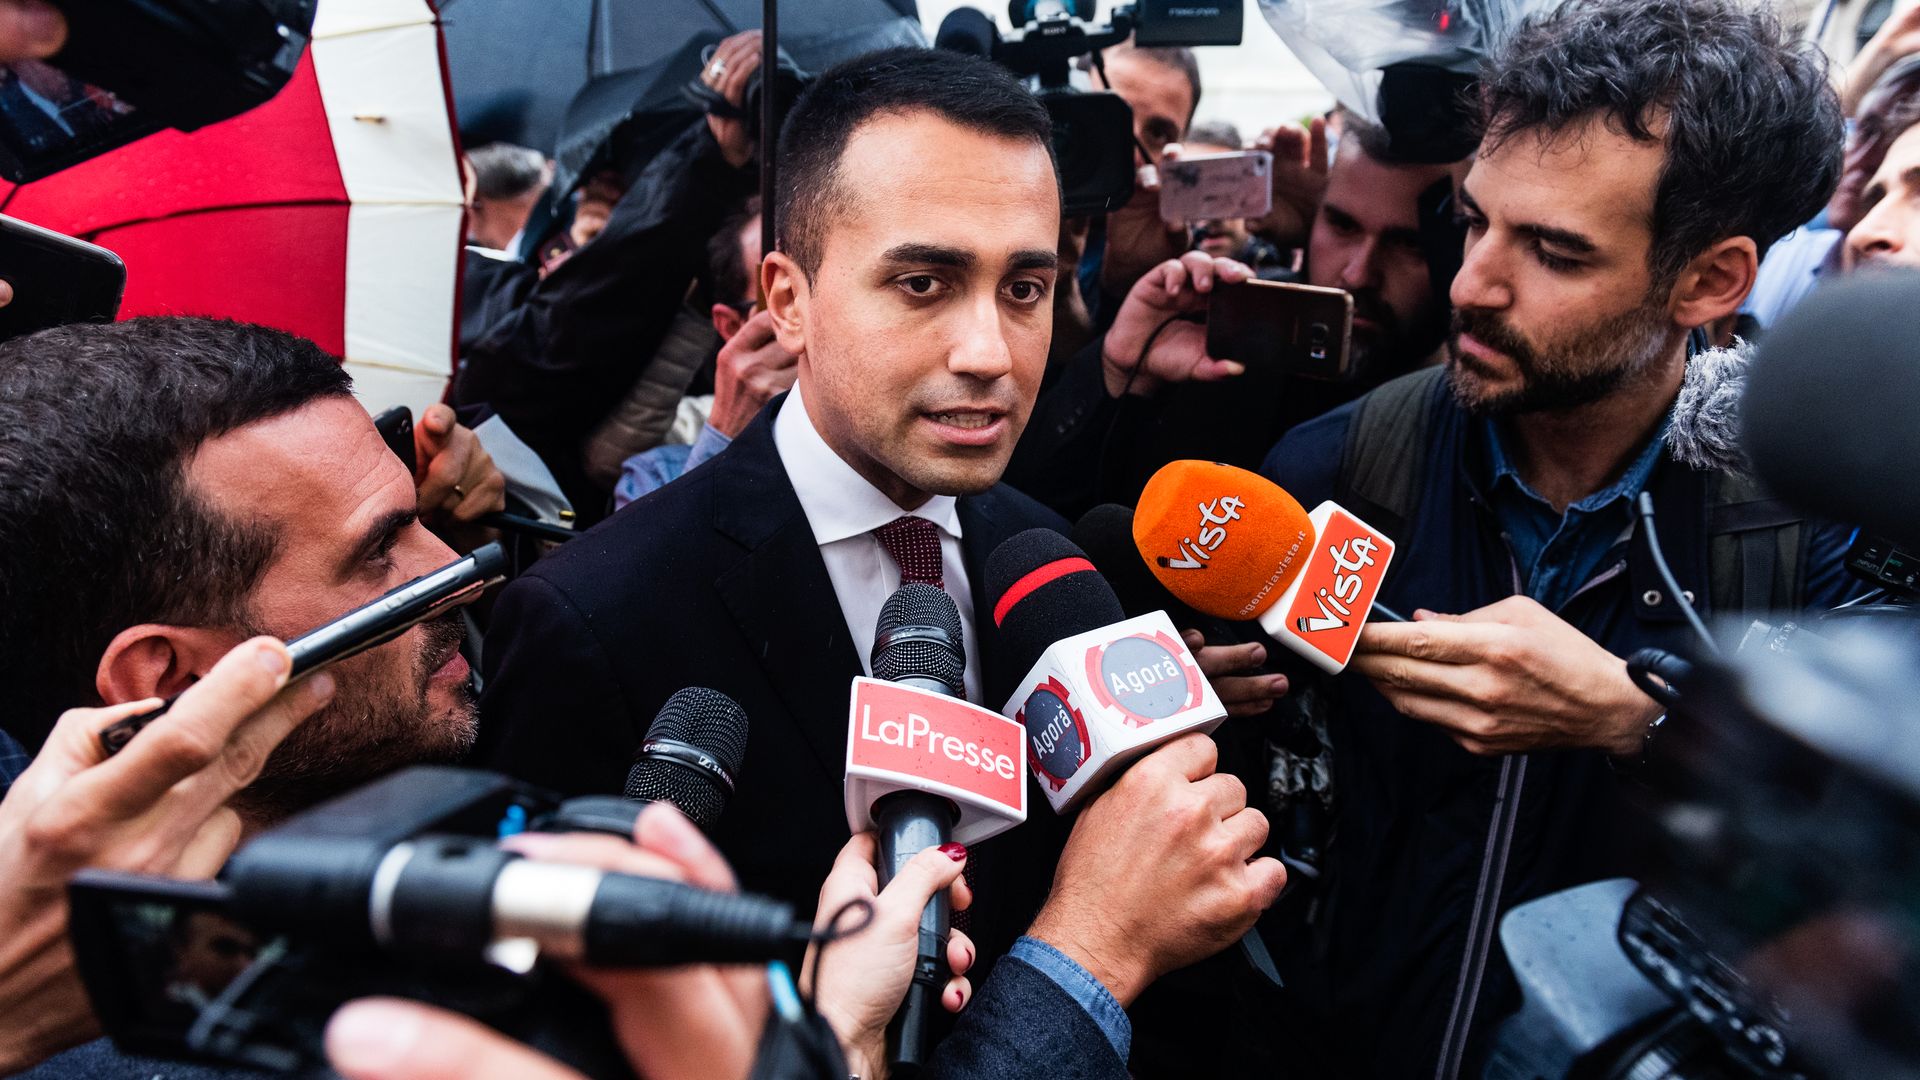 Five Star Movement leader Luigi Di Maio talks with the press after speaking with Presdent Matarella